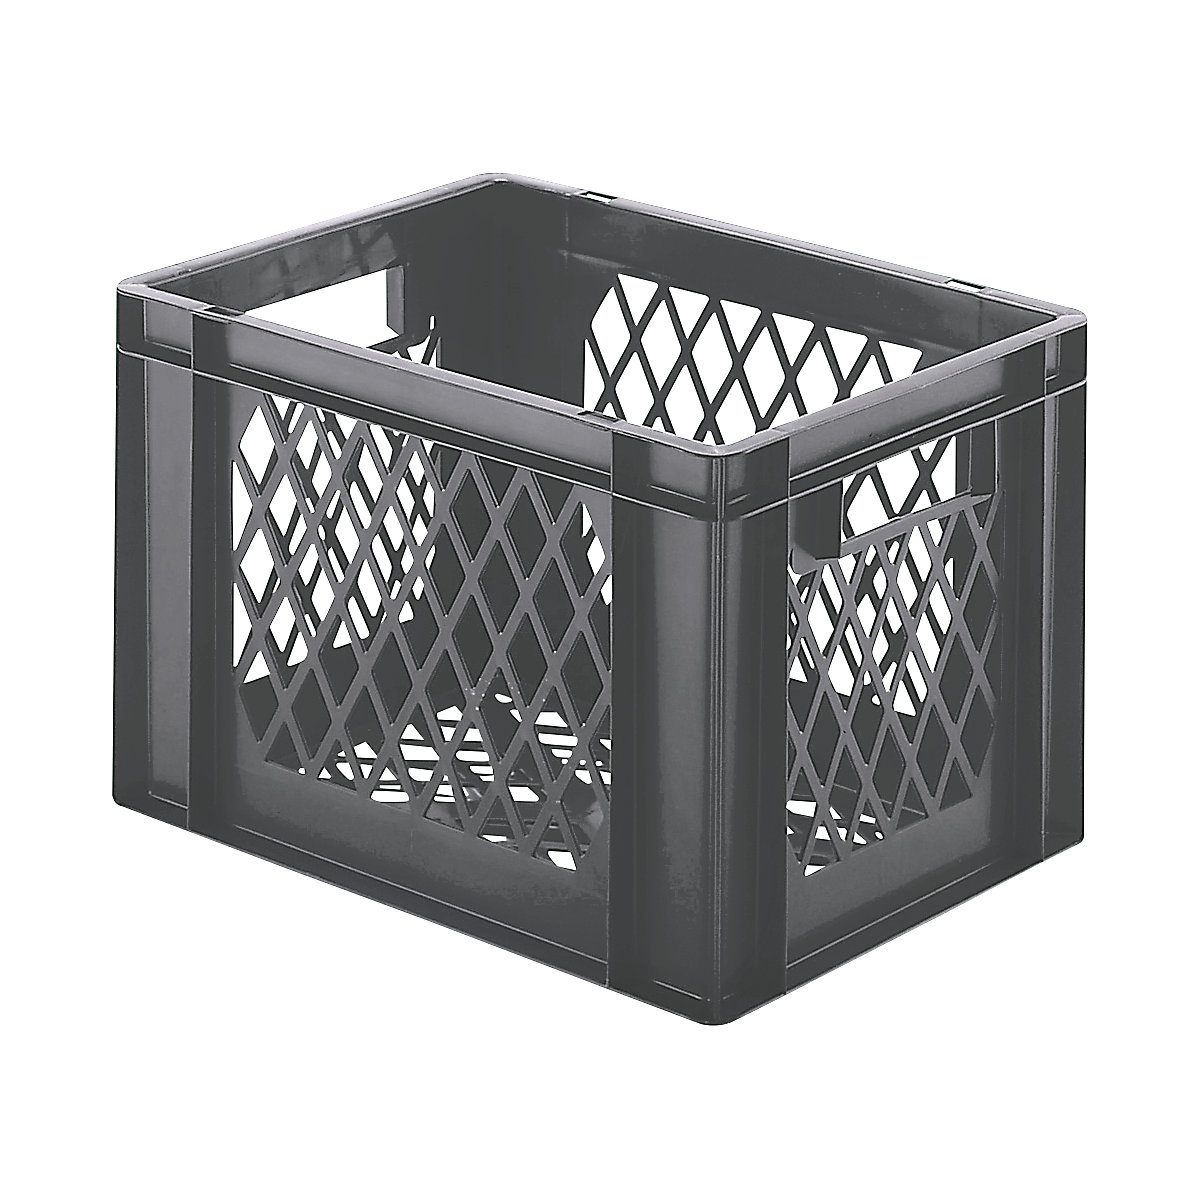 Euro stacking container, perforated walls and base, LxWxH 400 x 300 x 266 mm, grey, pack of 5